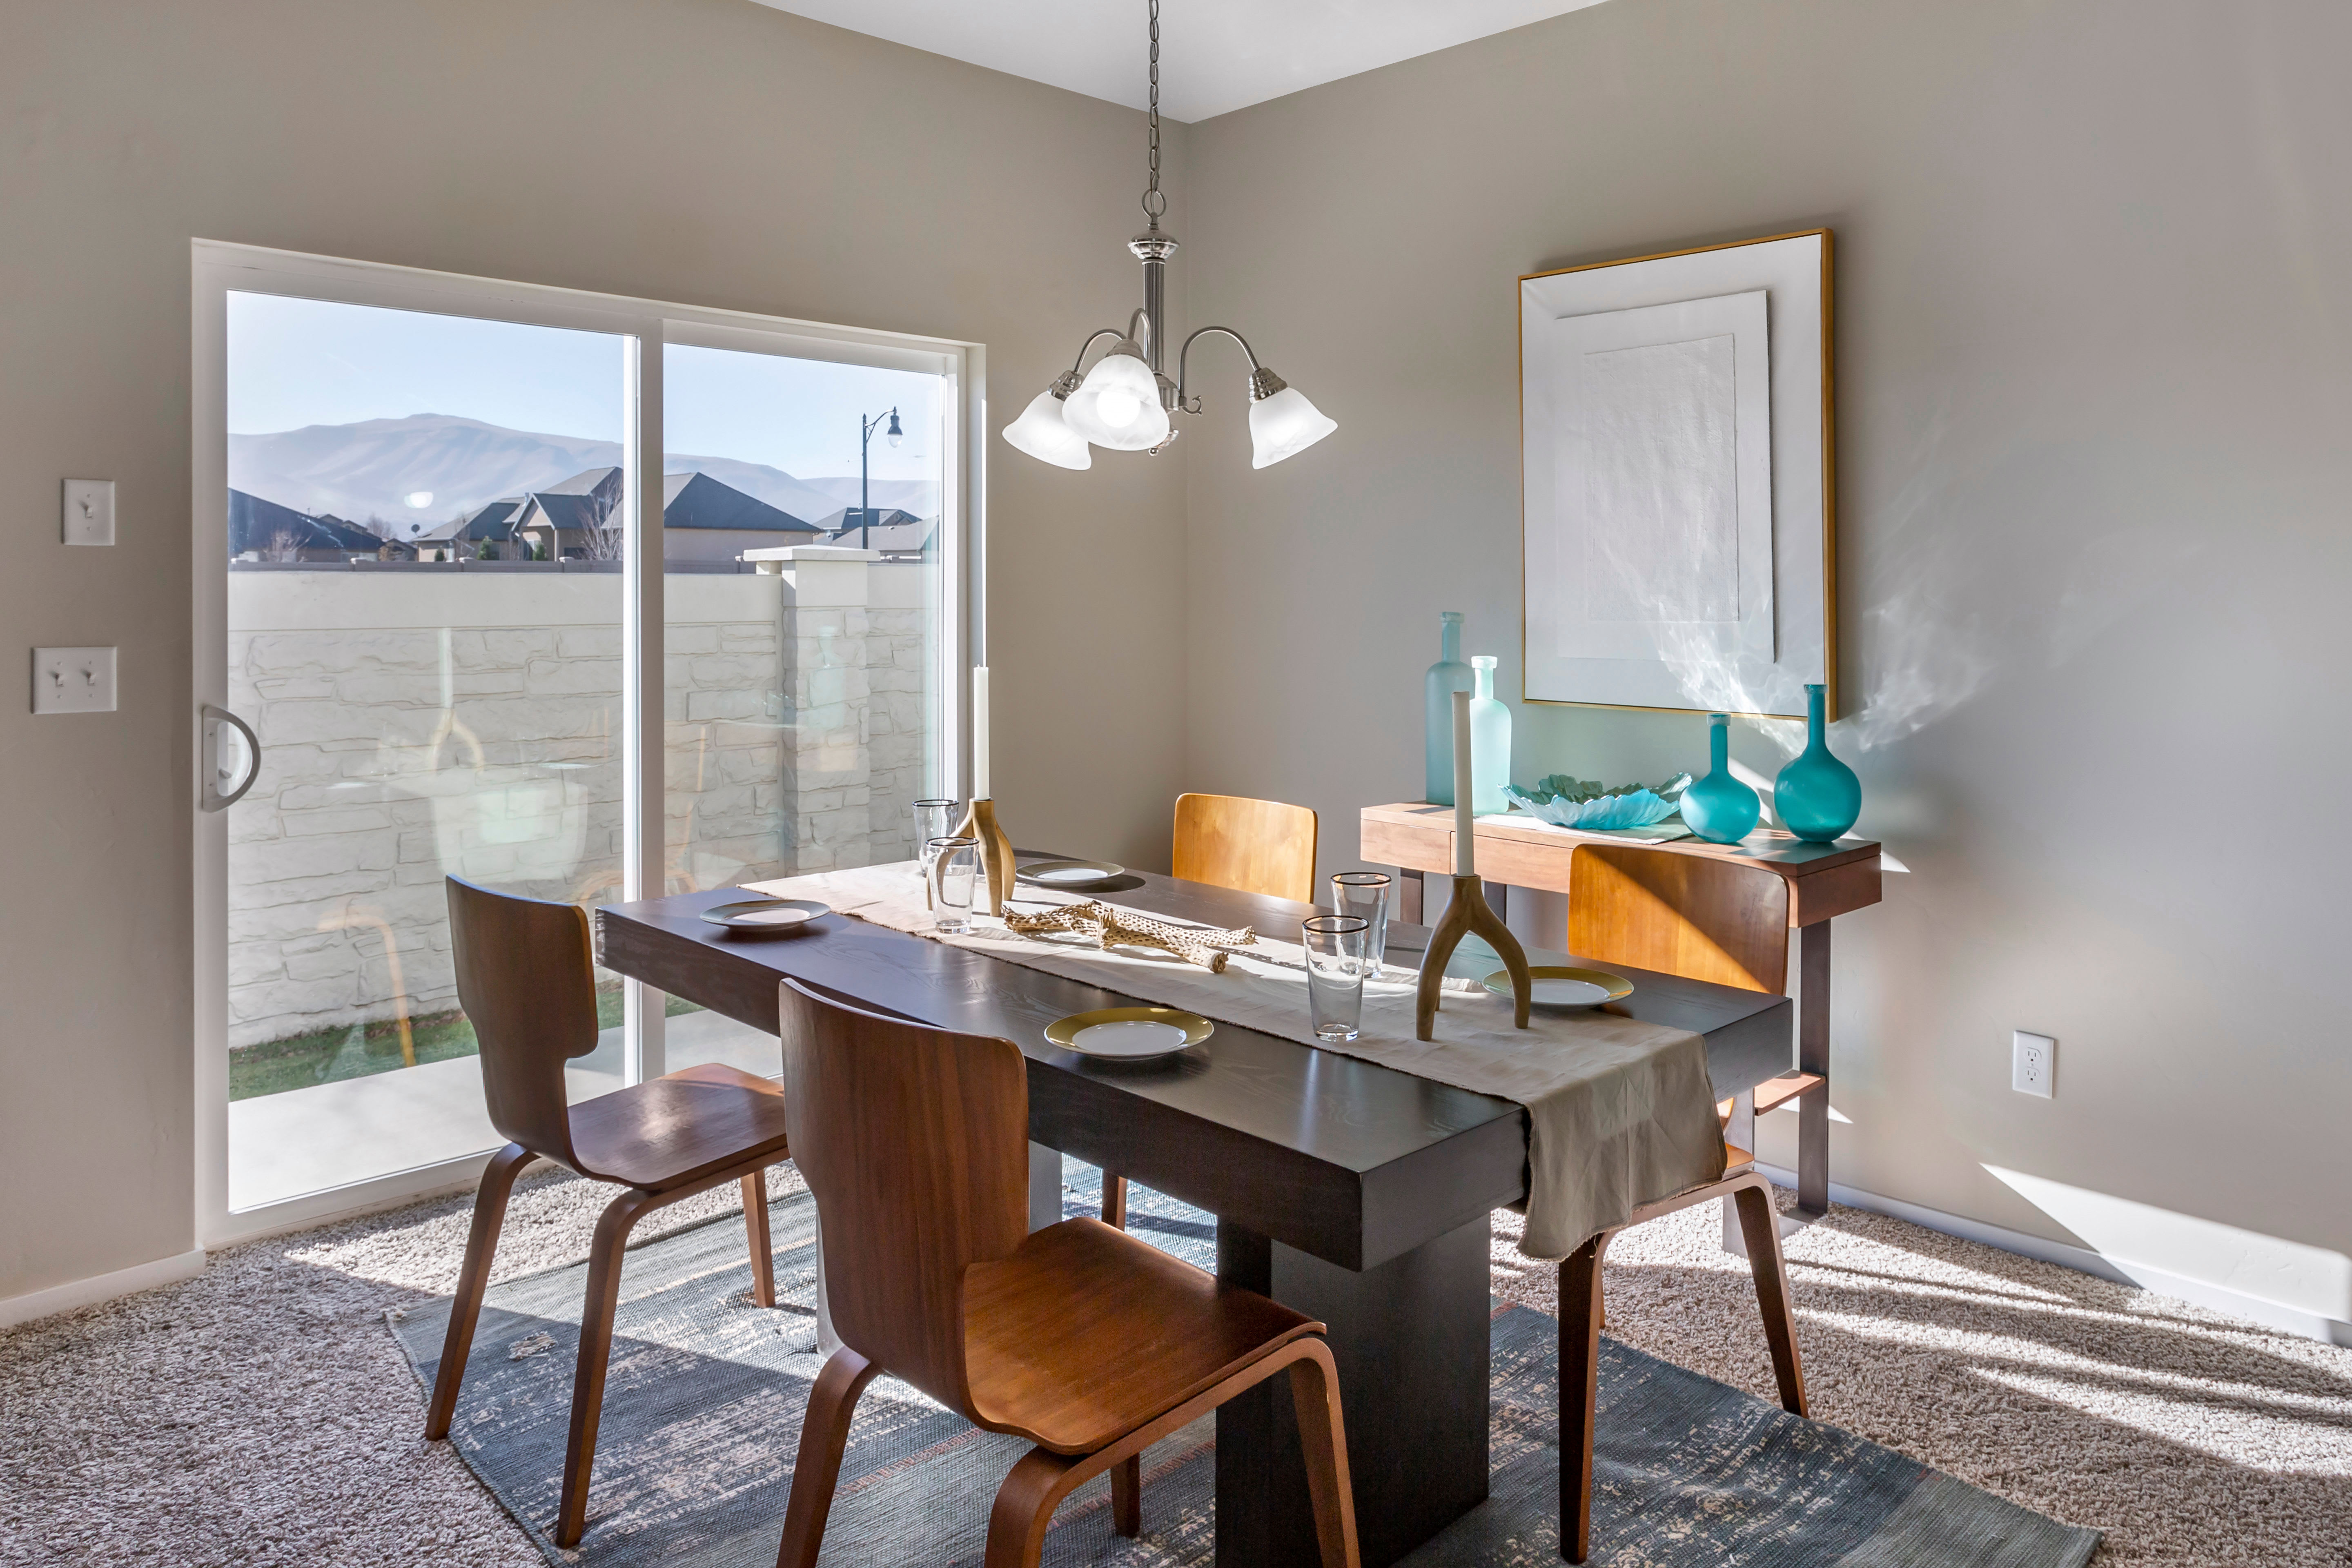 Model kitchen and dining area of a luxury townhome at Olympus at the Canyons in Herriman, Utah